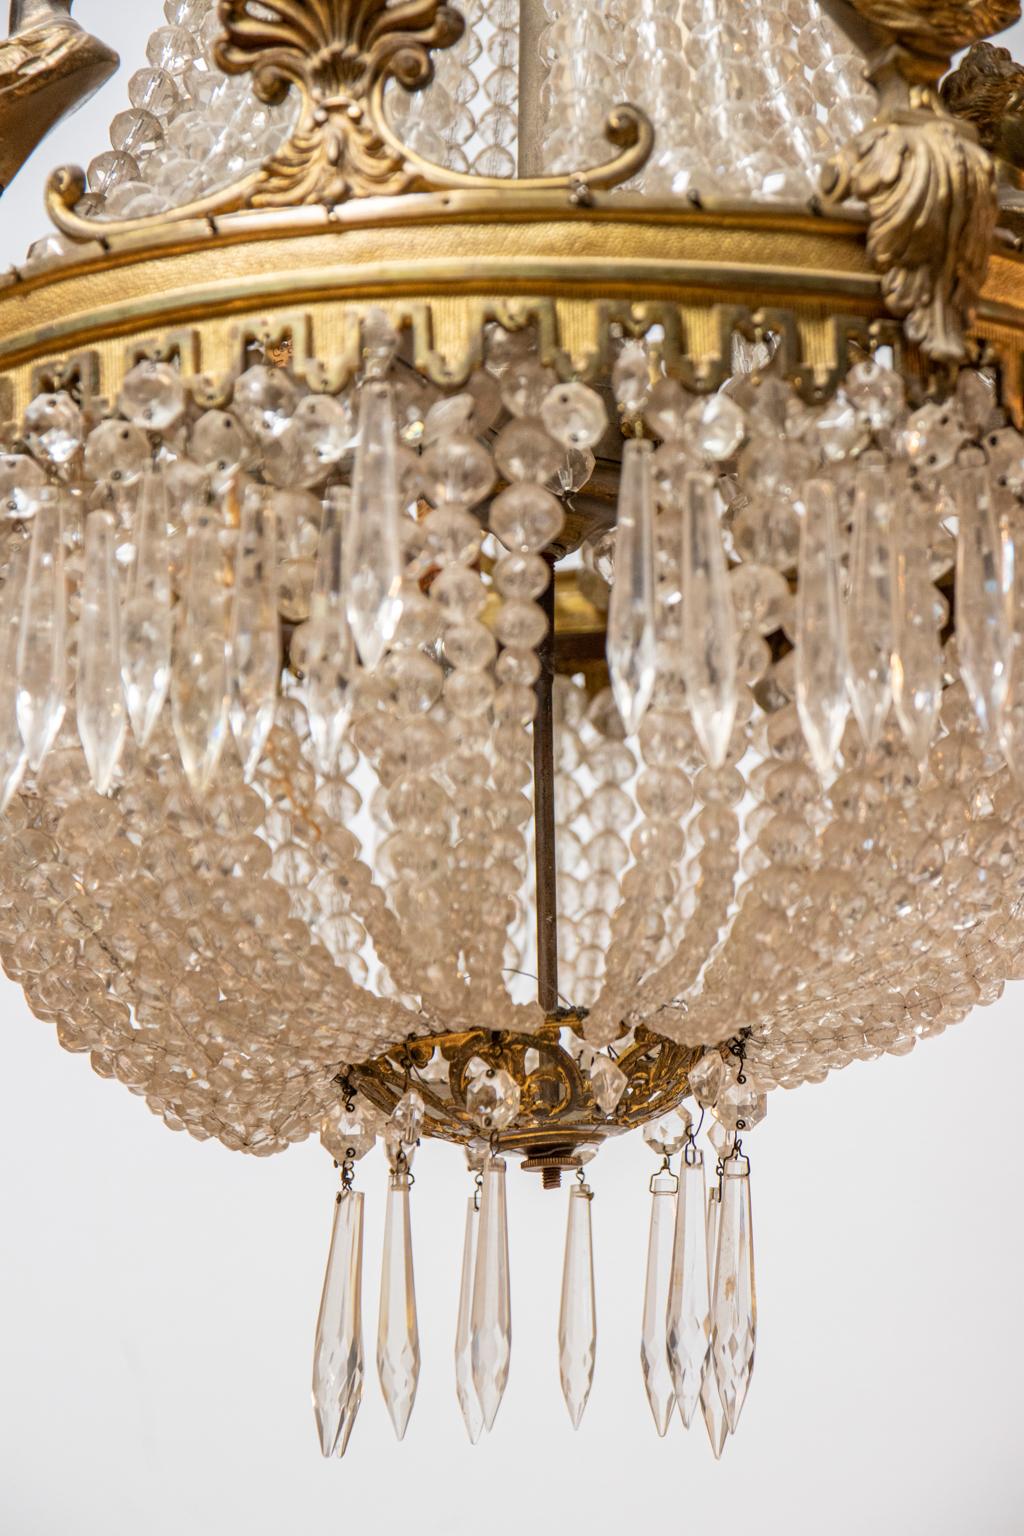 Beaded crystal chandelier with metal palmettes and stylized female half figure motifs. The chandelier is also constructed with scrolled foliage accents, pointed drop shaped crystal prisms, and beaded crystal swags. The top canopy is further detailed